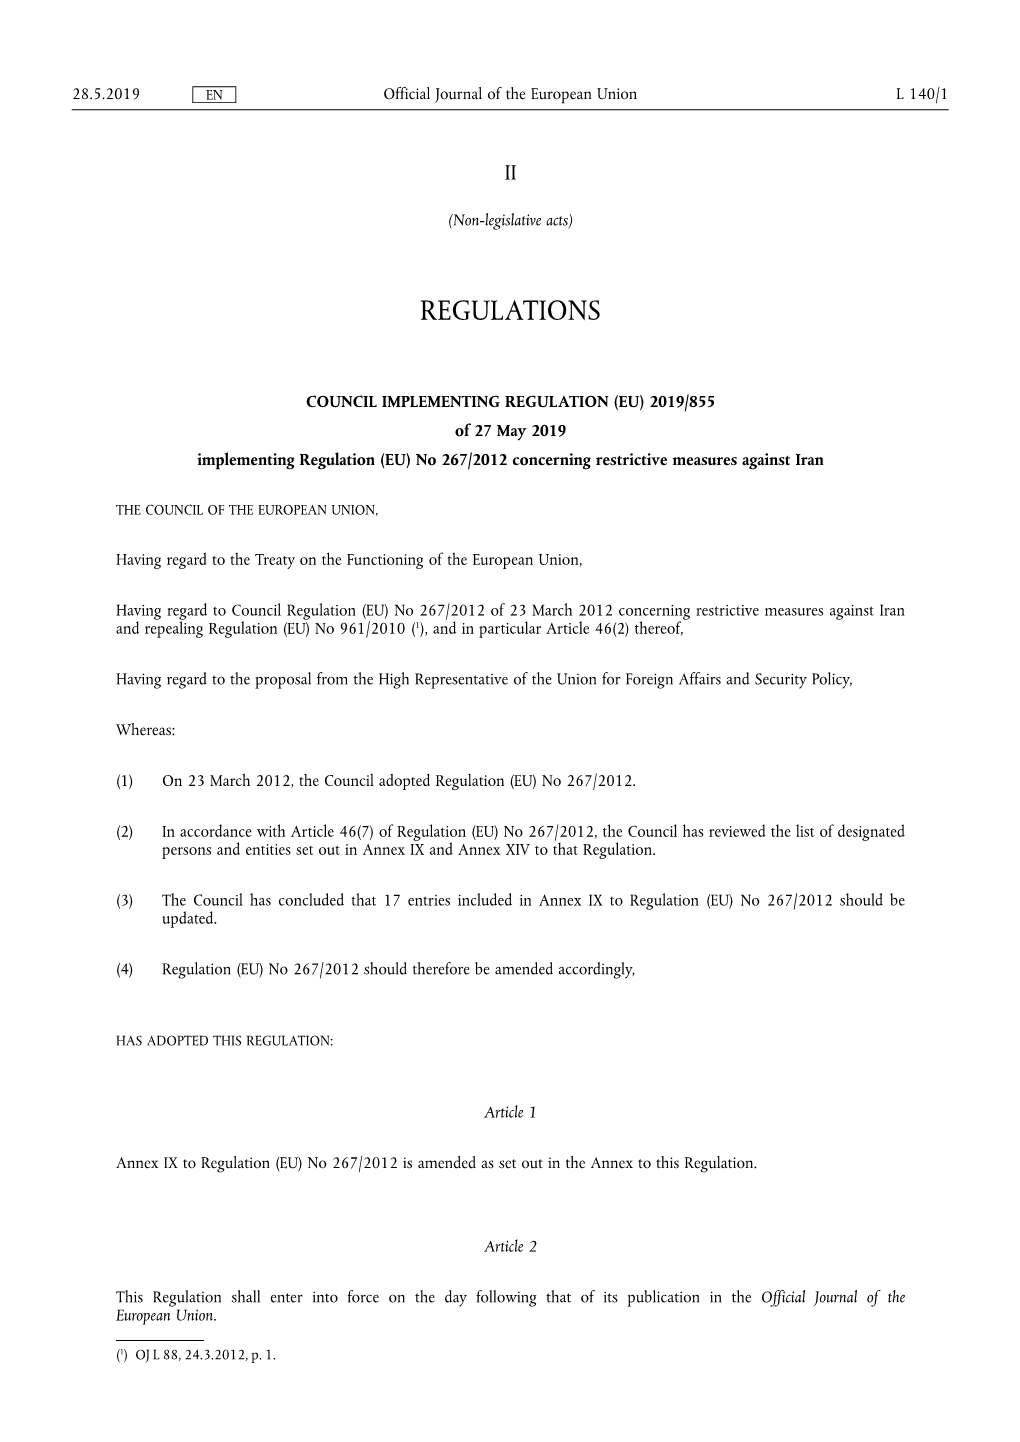 COUNCIL IMPLEMENTING REGULATION (EU) 2019/855 of 27 May 2019 Implementing Regulation (EU) No 267/2012 Concerning Restrictive Measures Against Iran